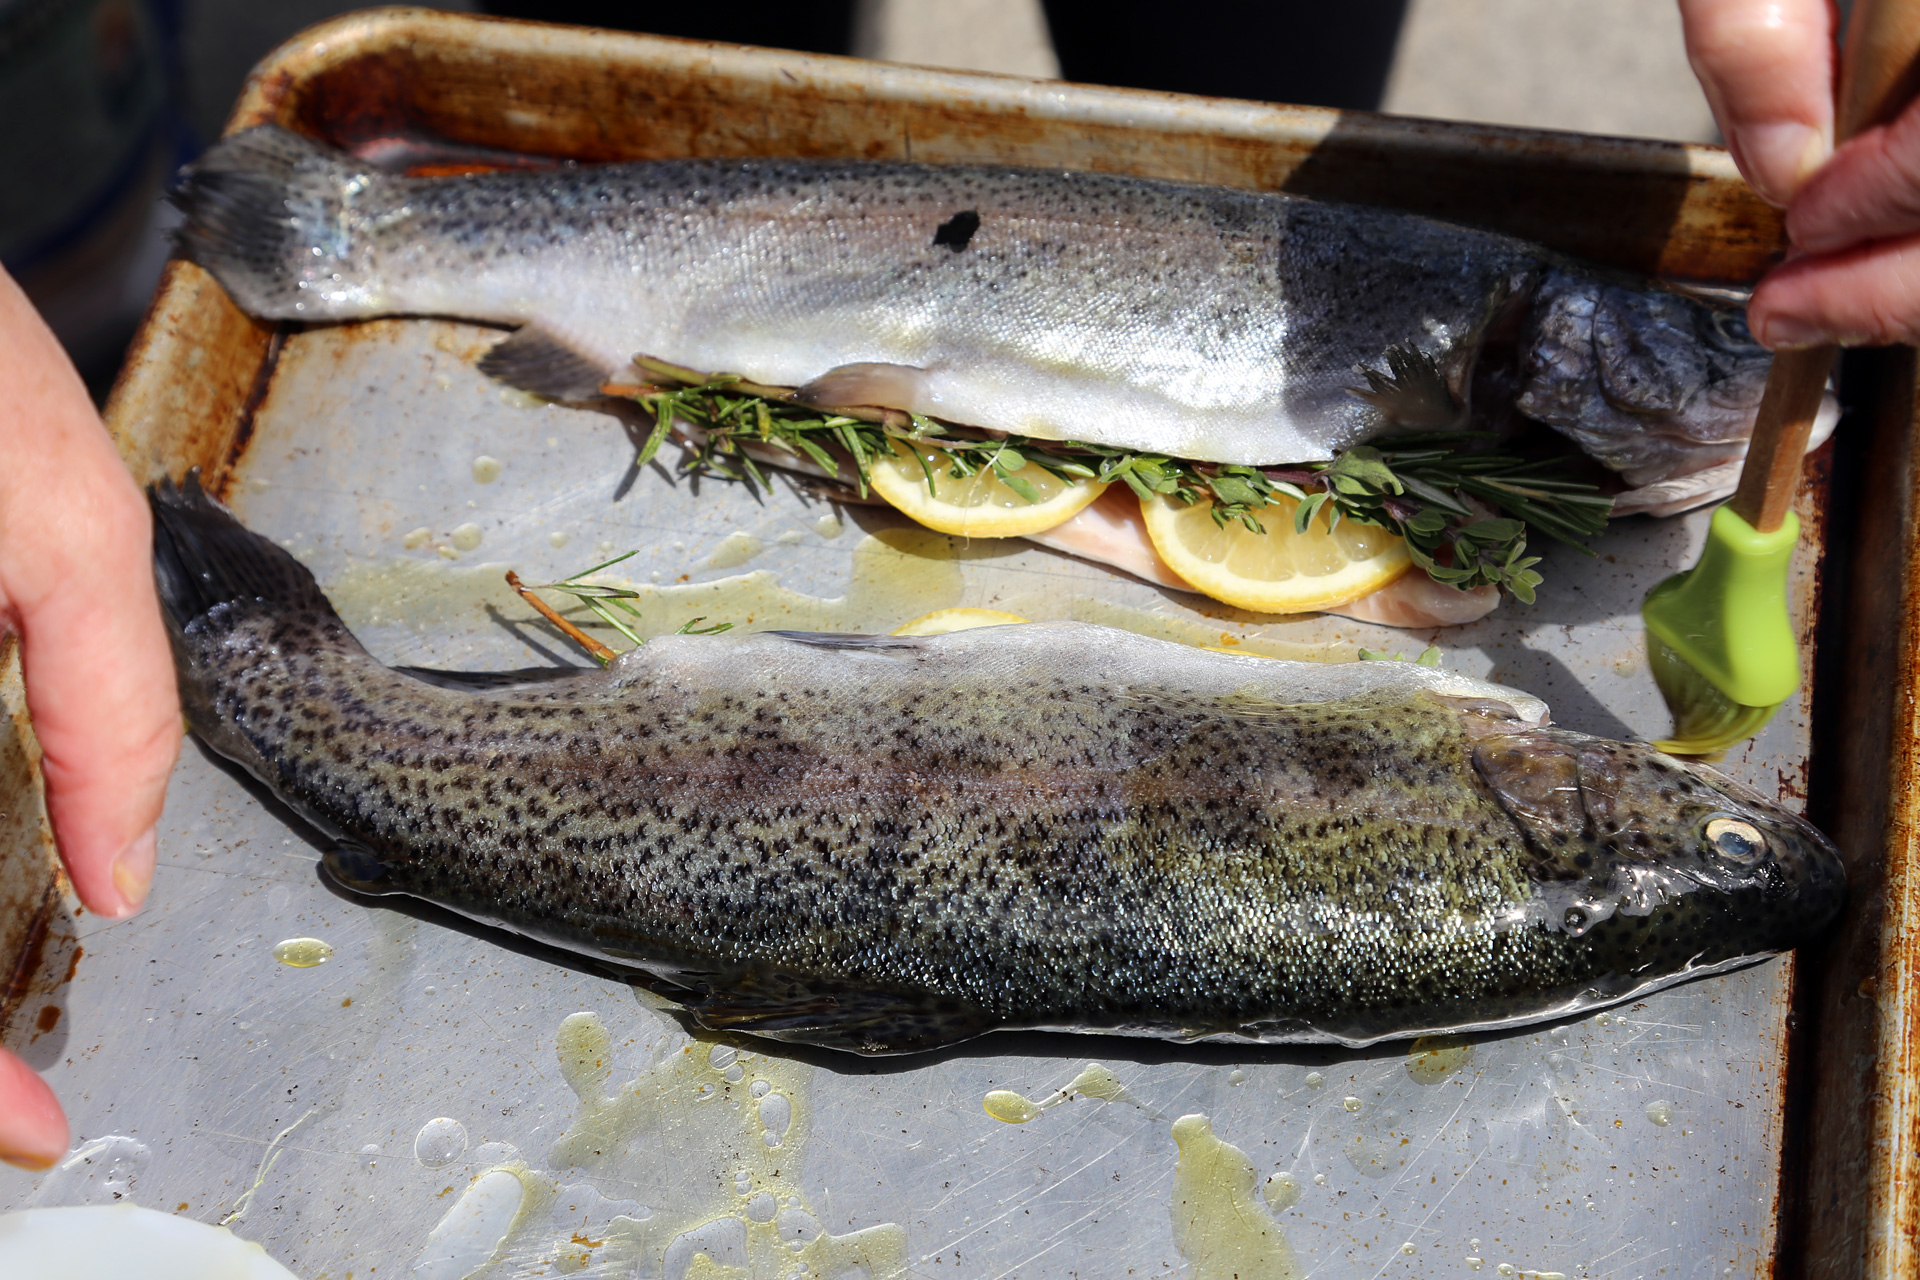 Brush the outside of each trout with plenty of olive oil and set on a baking sheet.